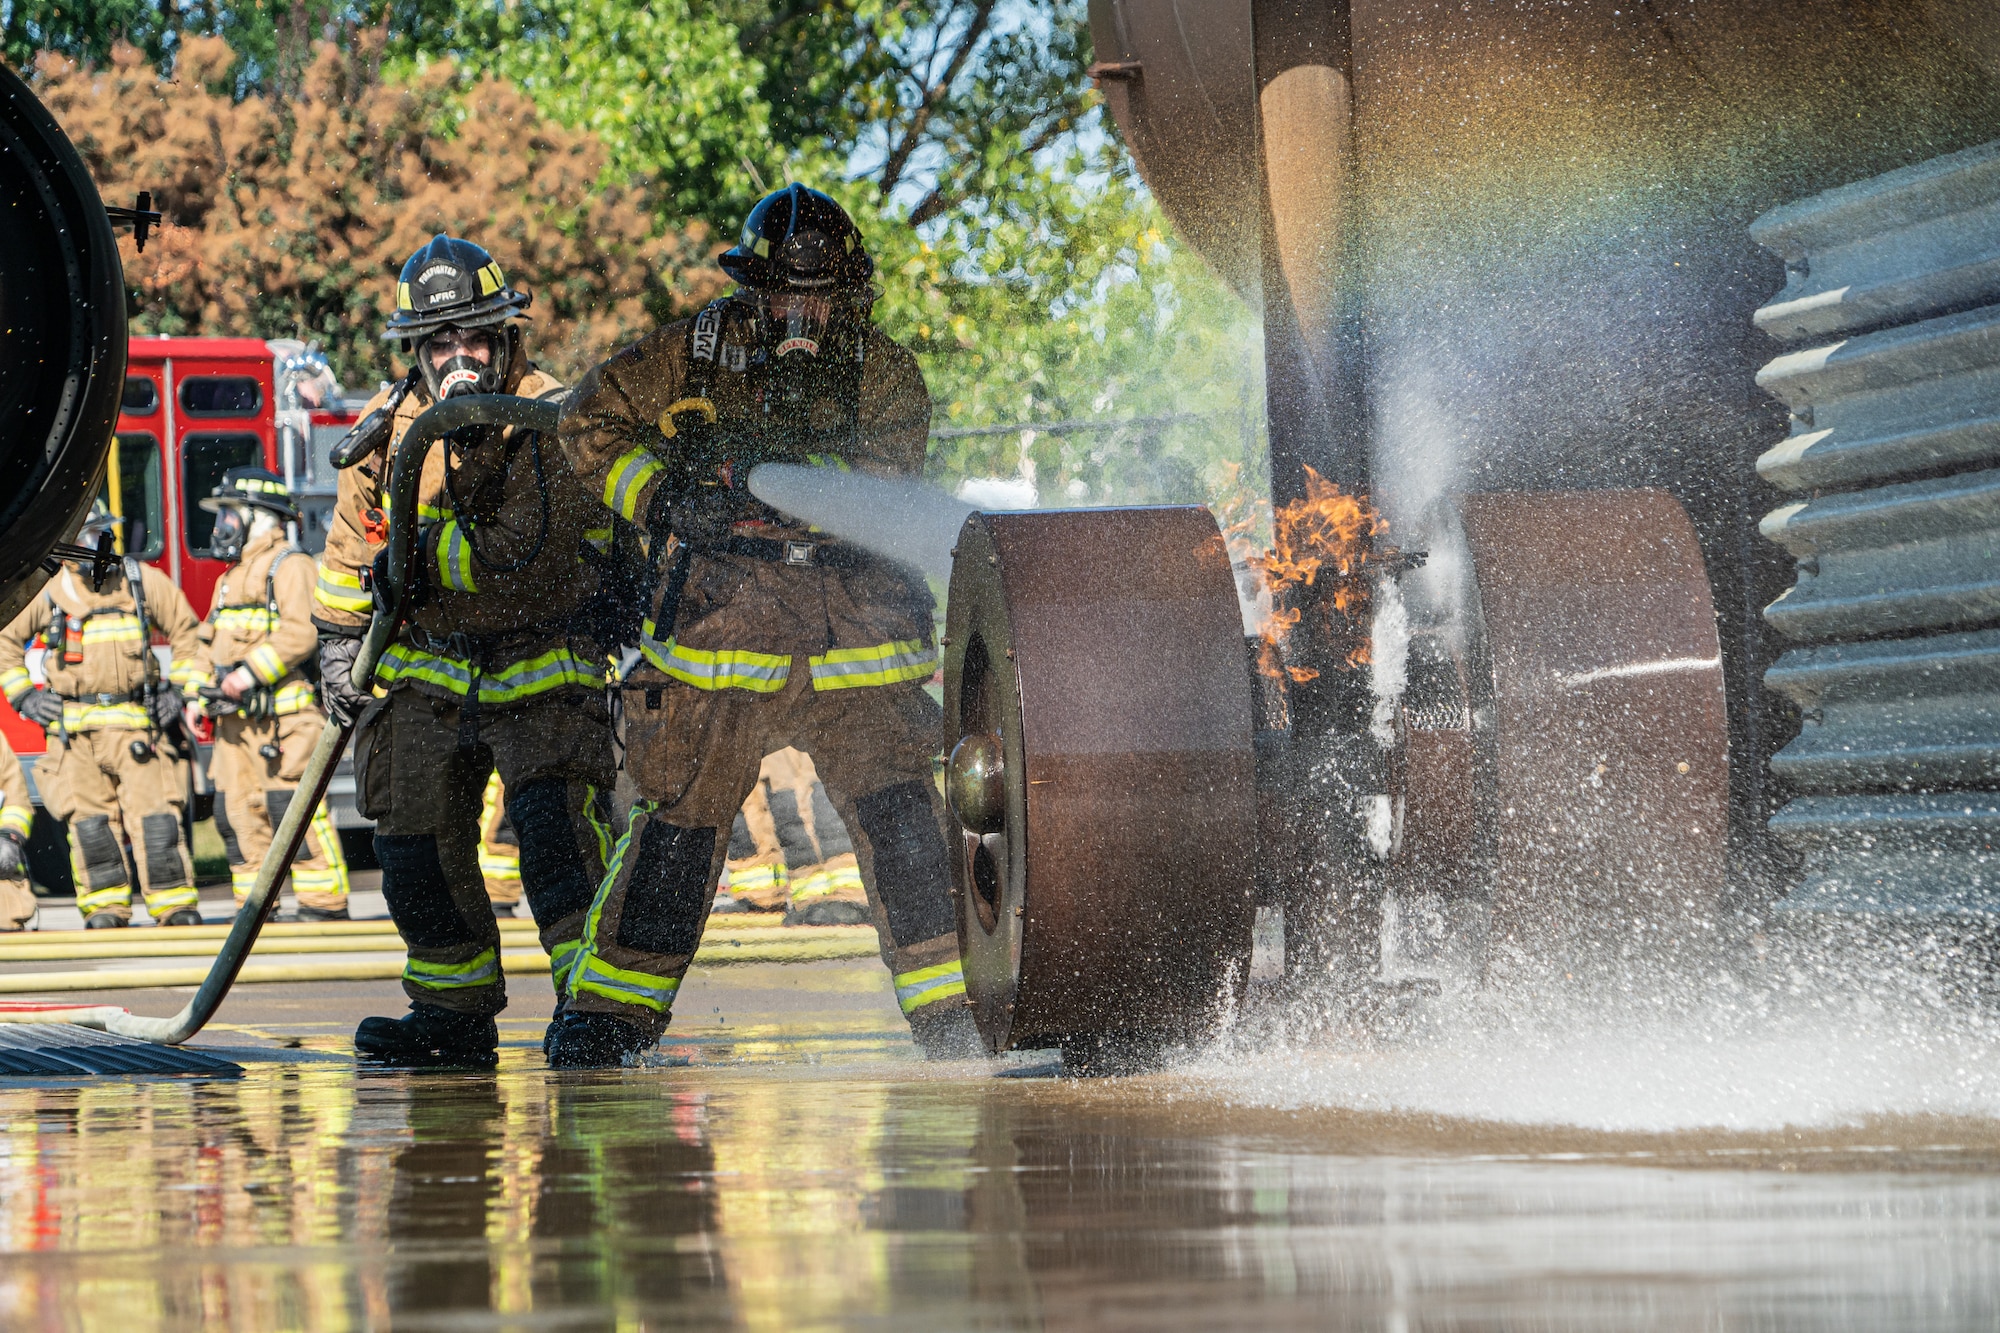 Firefighters with the 914th Fire Emergency Services extinguish an aircraft brake fire while conducting fire suppression training.